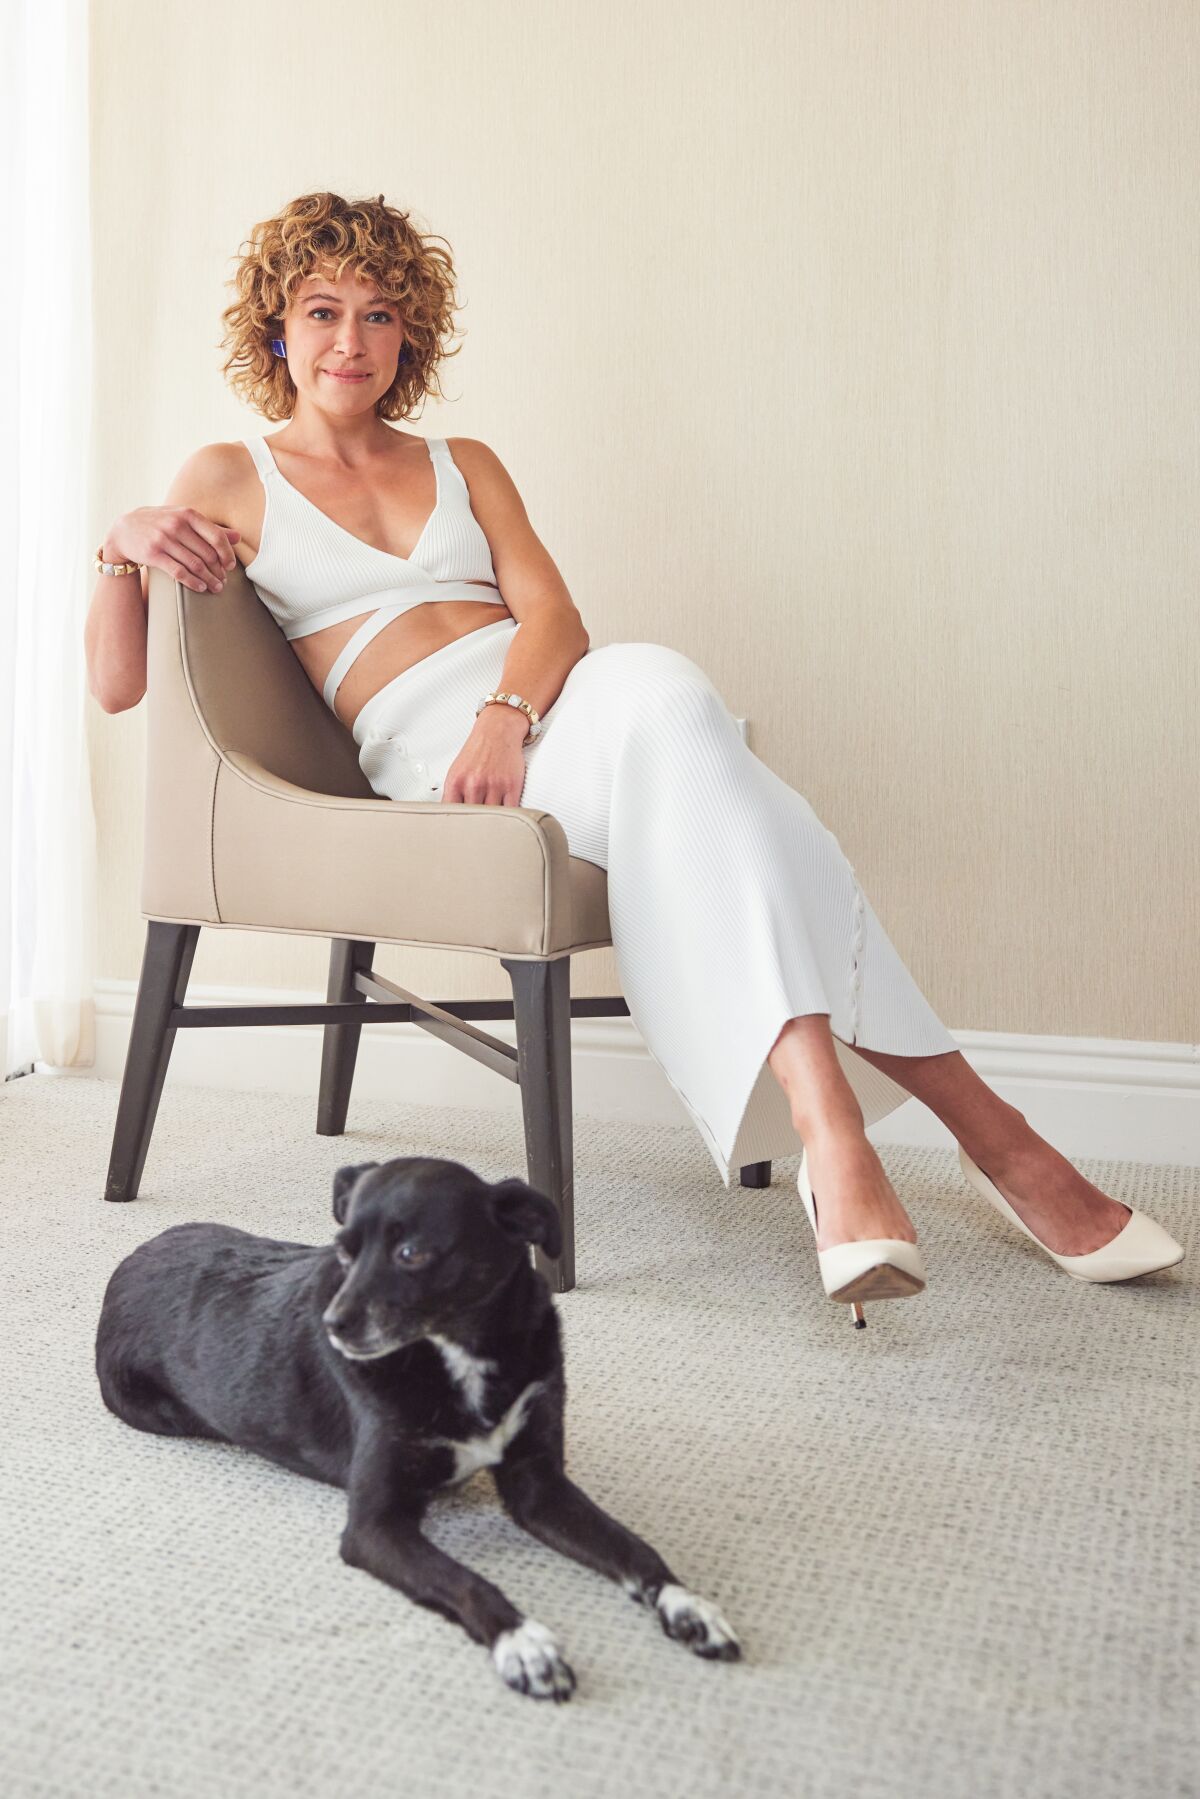 A woman sitting in a chair with a dog by her feet.